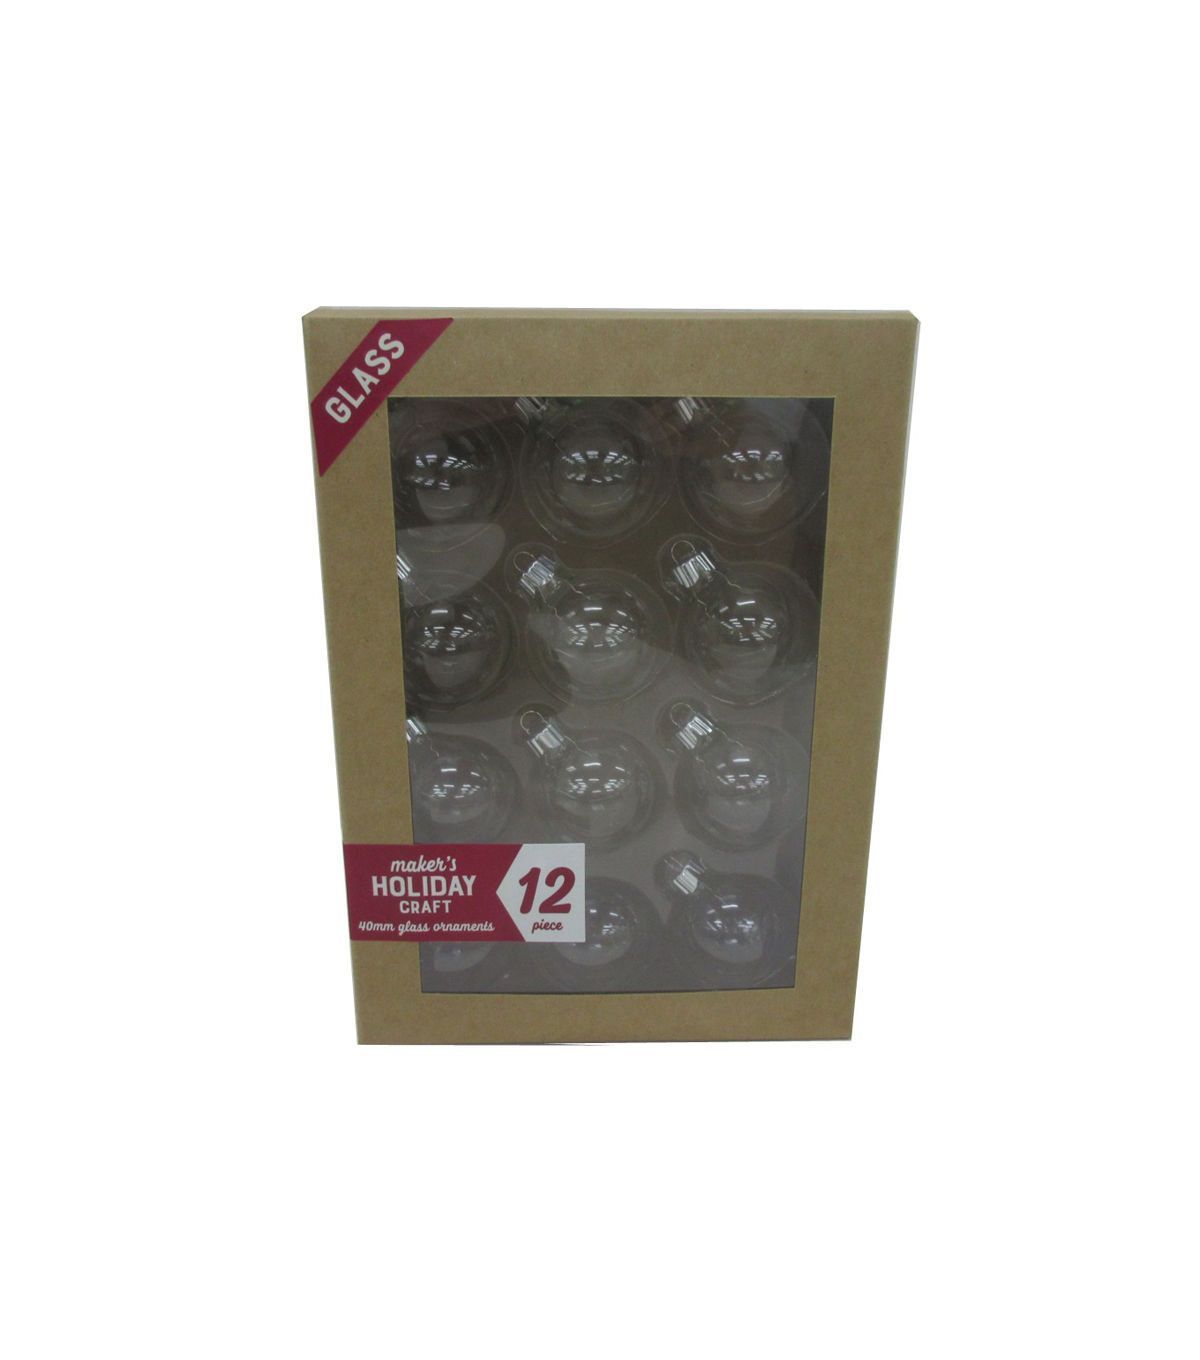 Maker's Holiday Craft 12pc Glass 40mm Ornaments - Clear -   24 holiday crafts products
 ideas